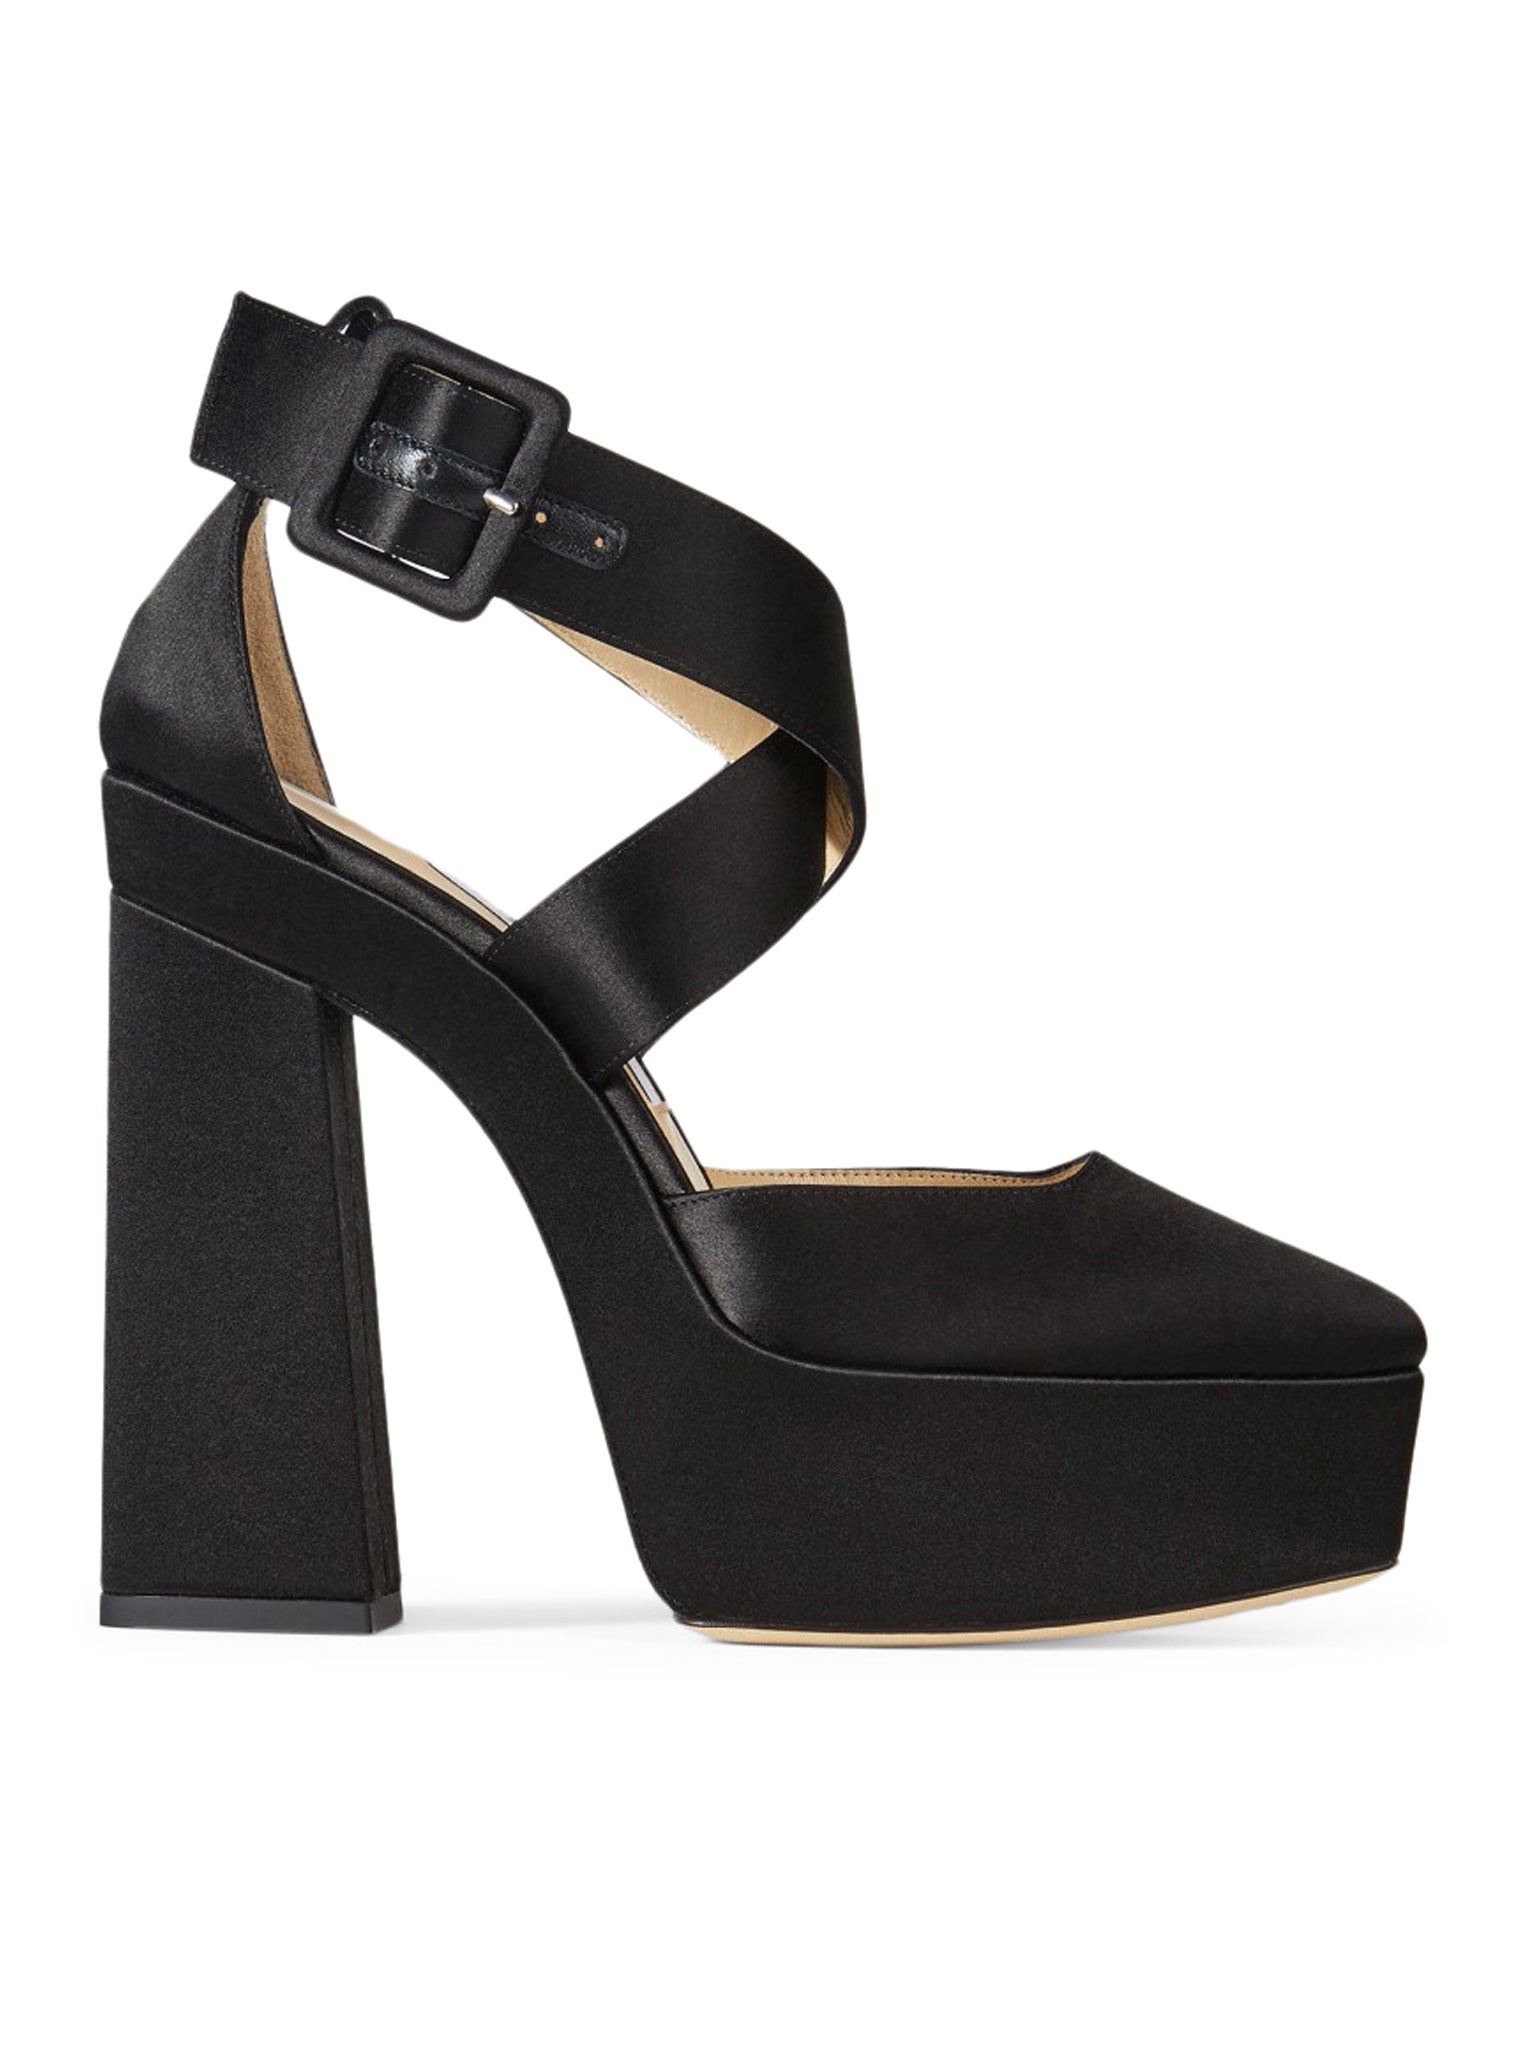 Shoes with heel and platform in satin